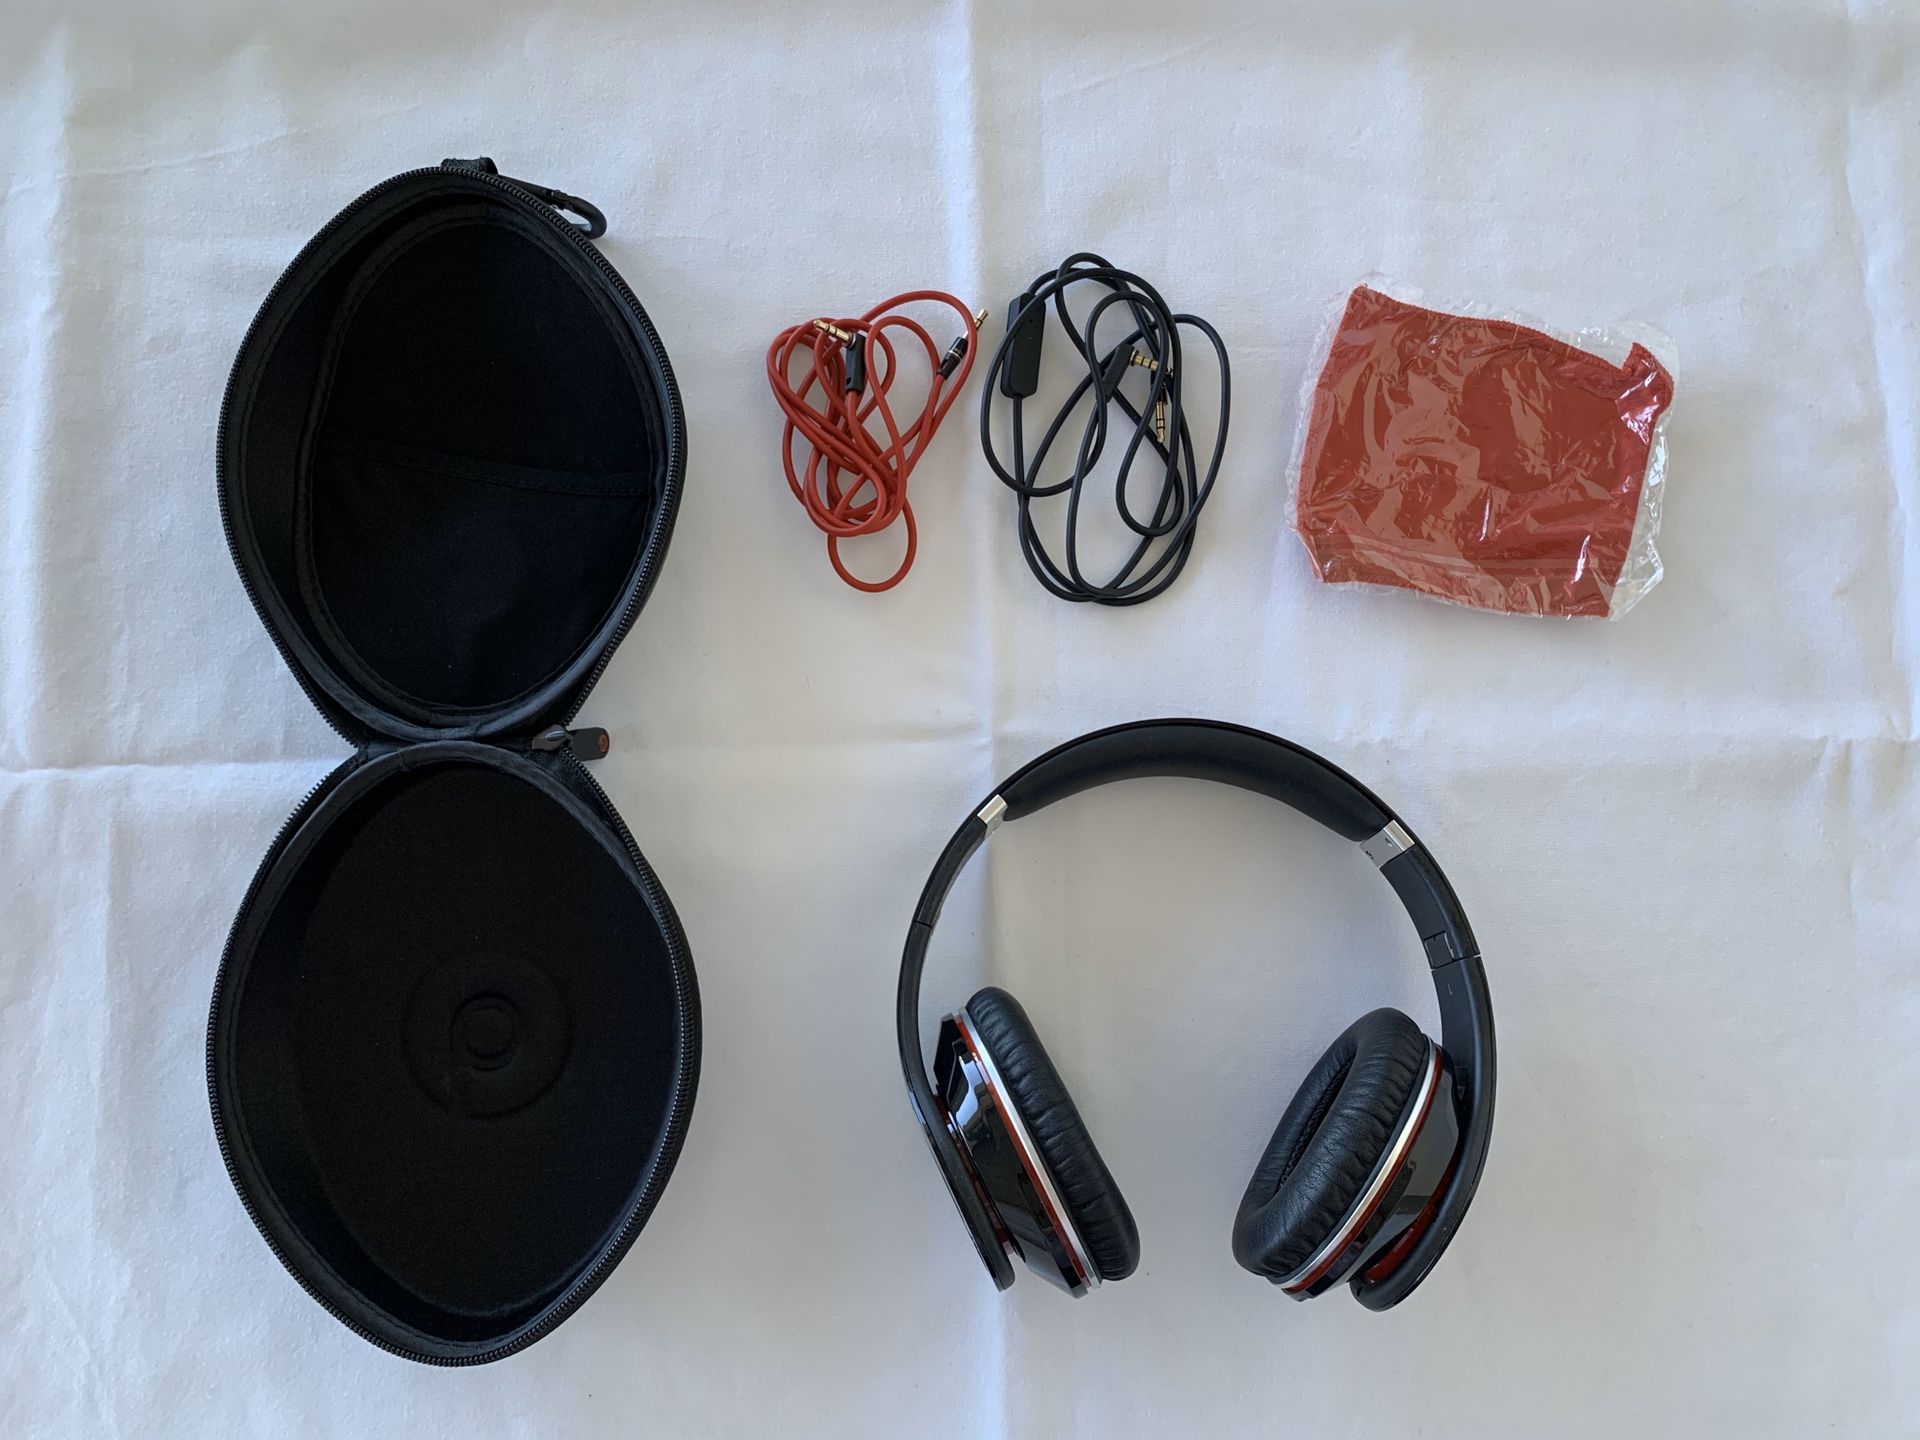 Monster beats by Dre with noise cancelling